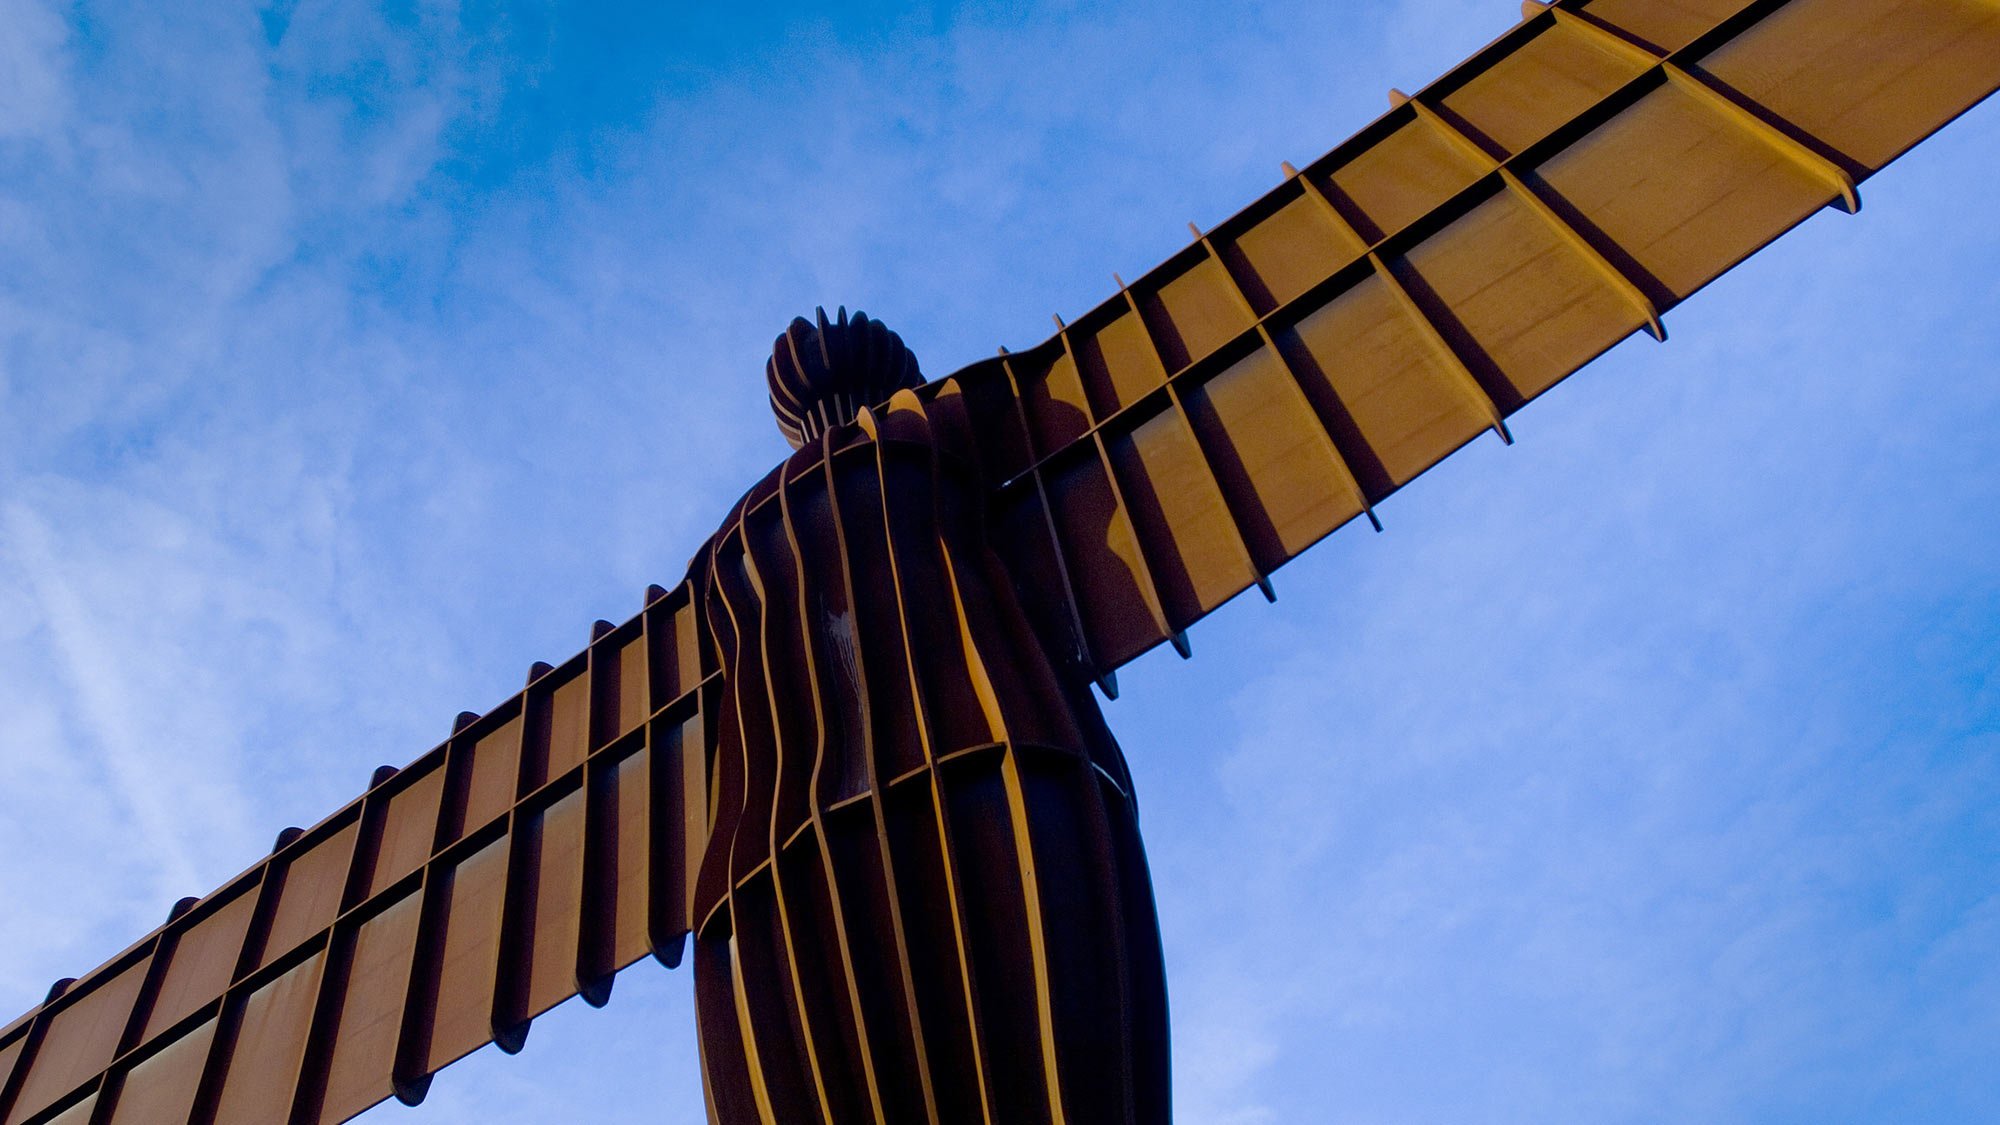 The Angel Of The North showing tilted wingspan embrace